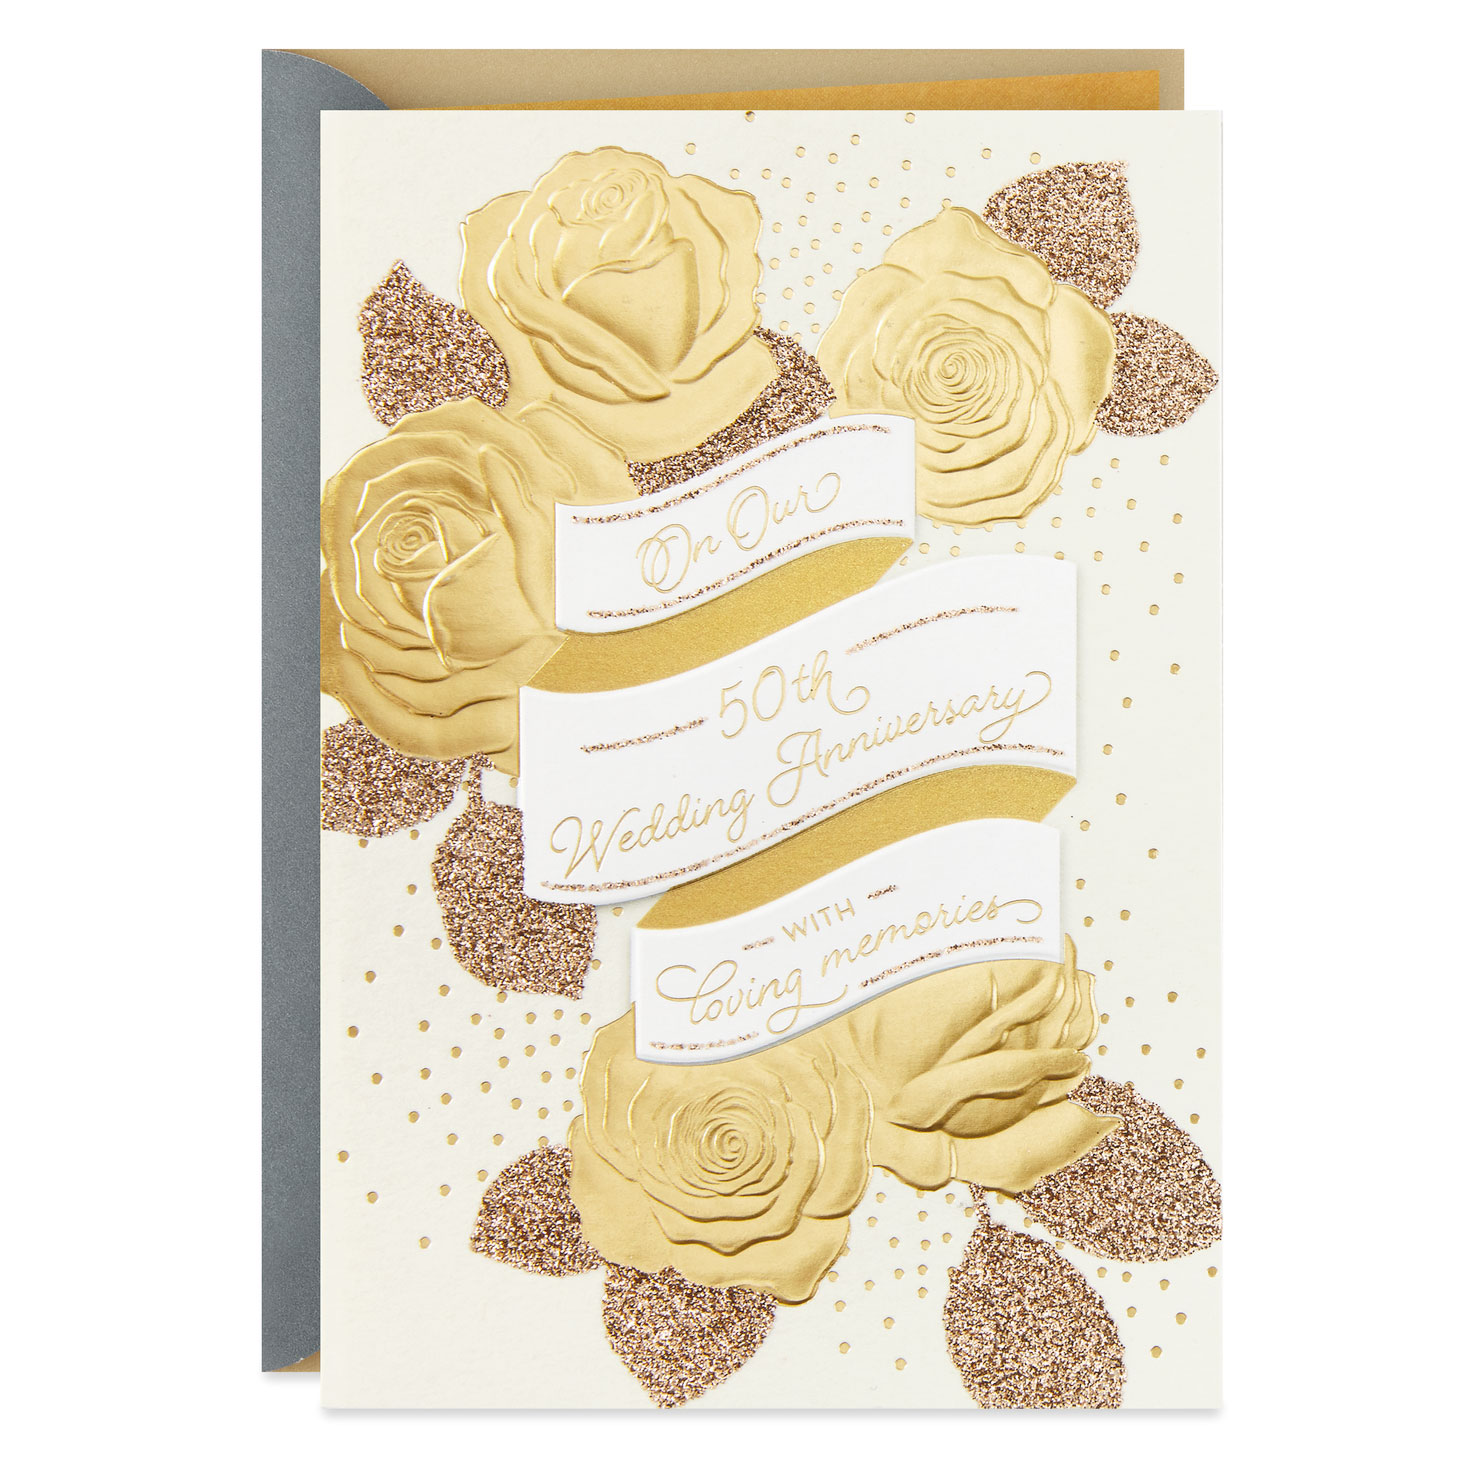 Details about   HAPPY 50th ANNIVERSARY Hallmark Greeting Card You are a perfect match 